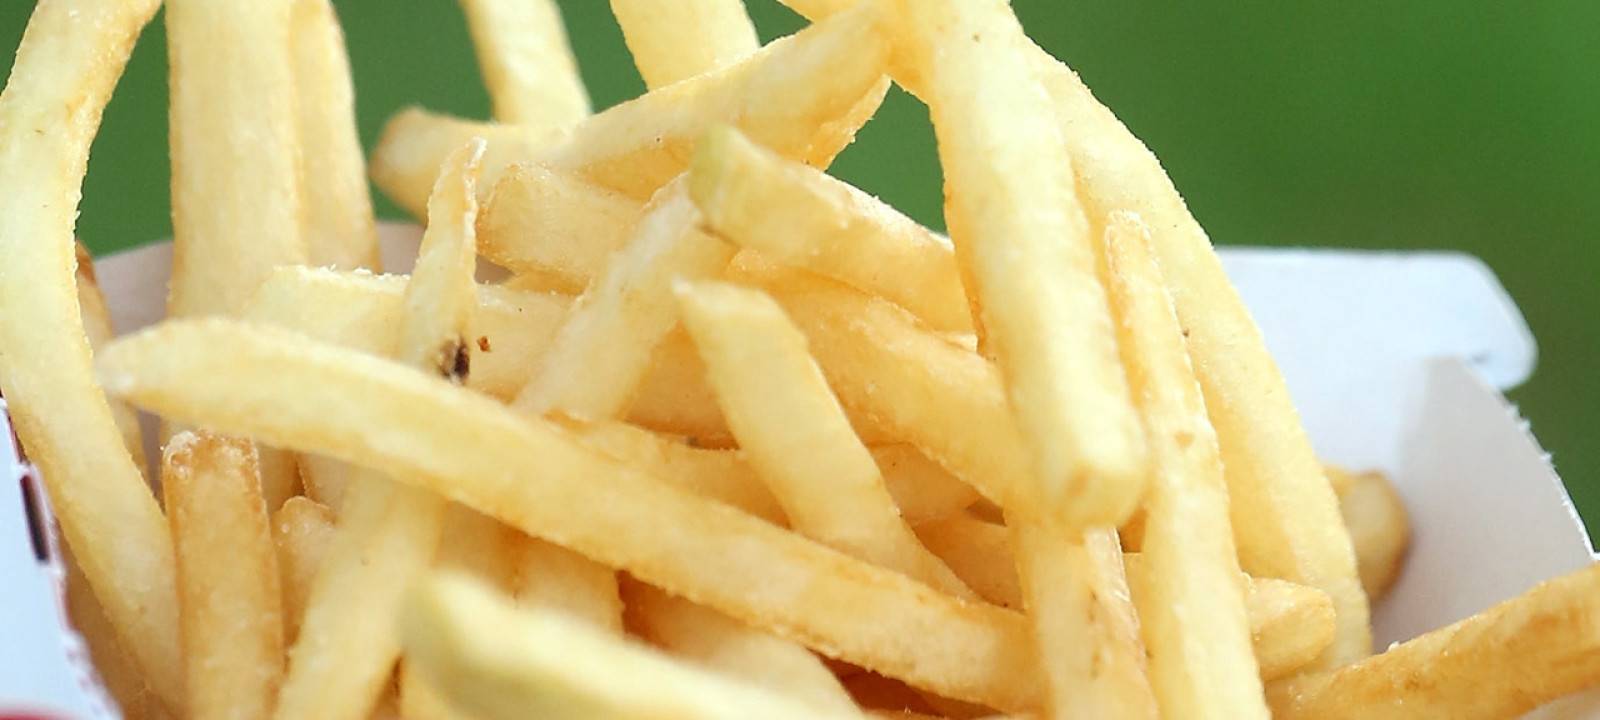 French Fries and Potato Chips